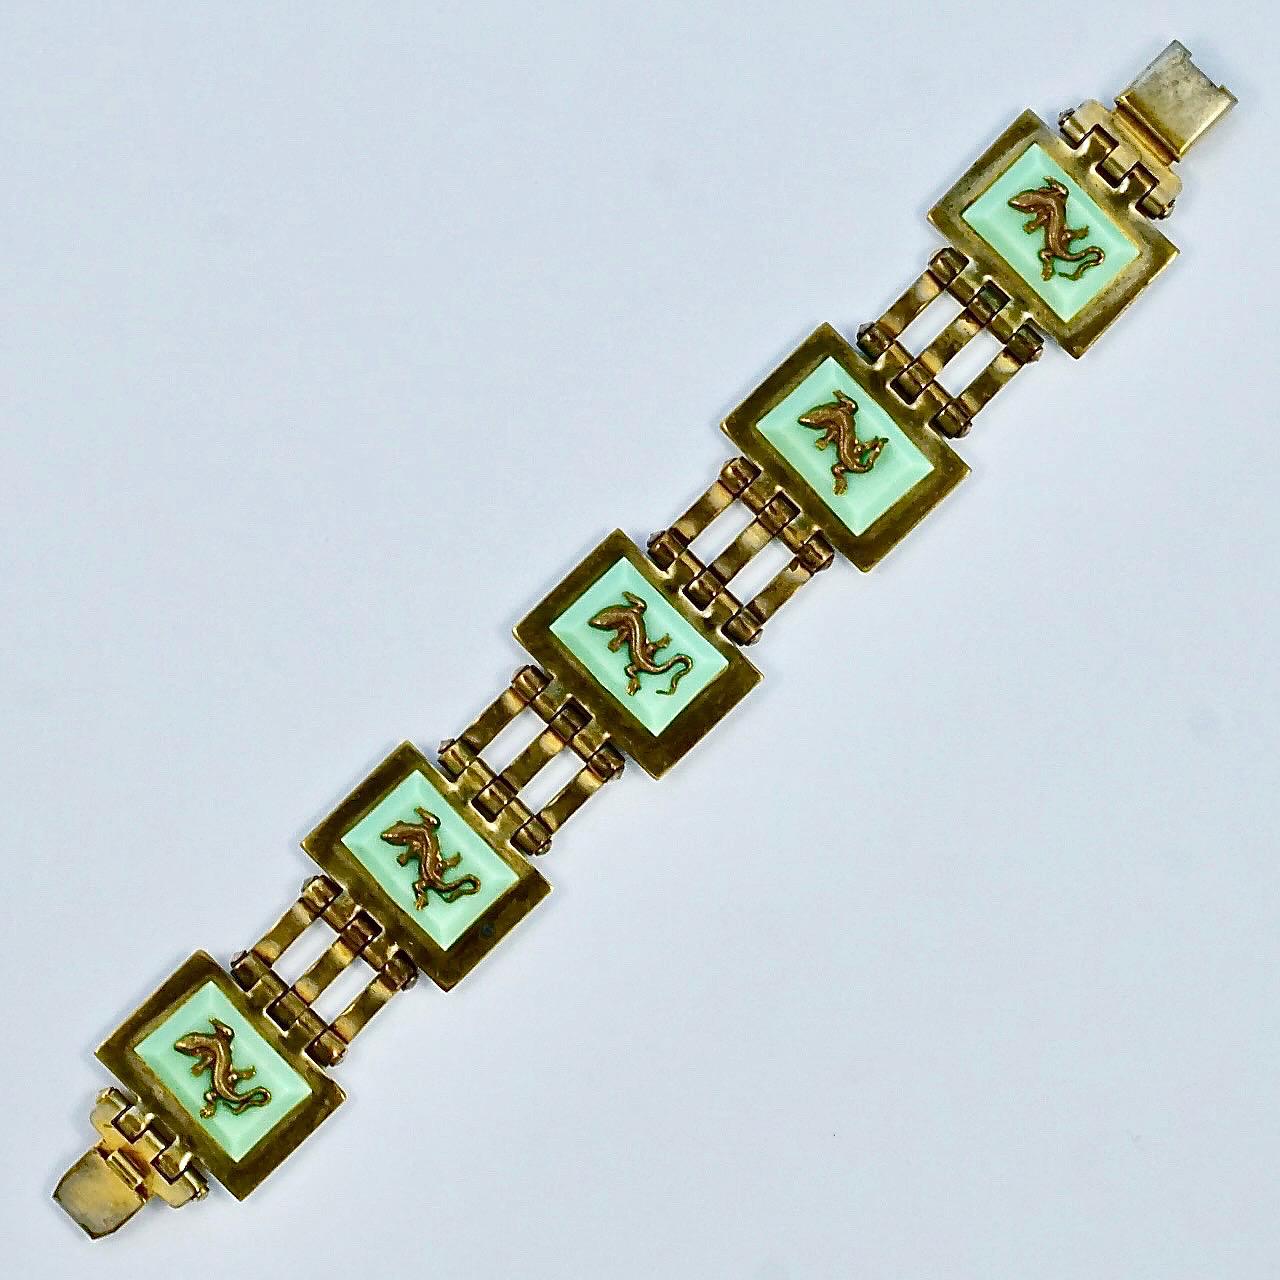 Fabulous Jean Painlevé French Art Deco gold plated link bracelet, with mint green Bakelite, and featuring five salamanders. Measuring length 17.7cm / 6.9 inches by width 2.4cm / .9 inch. The bracelet has wear to the gold plating and scratching. The